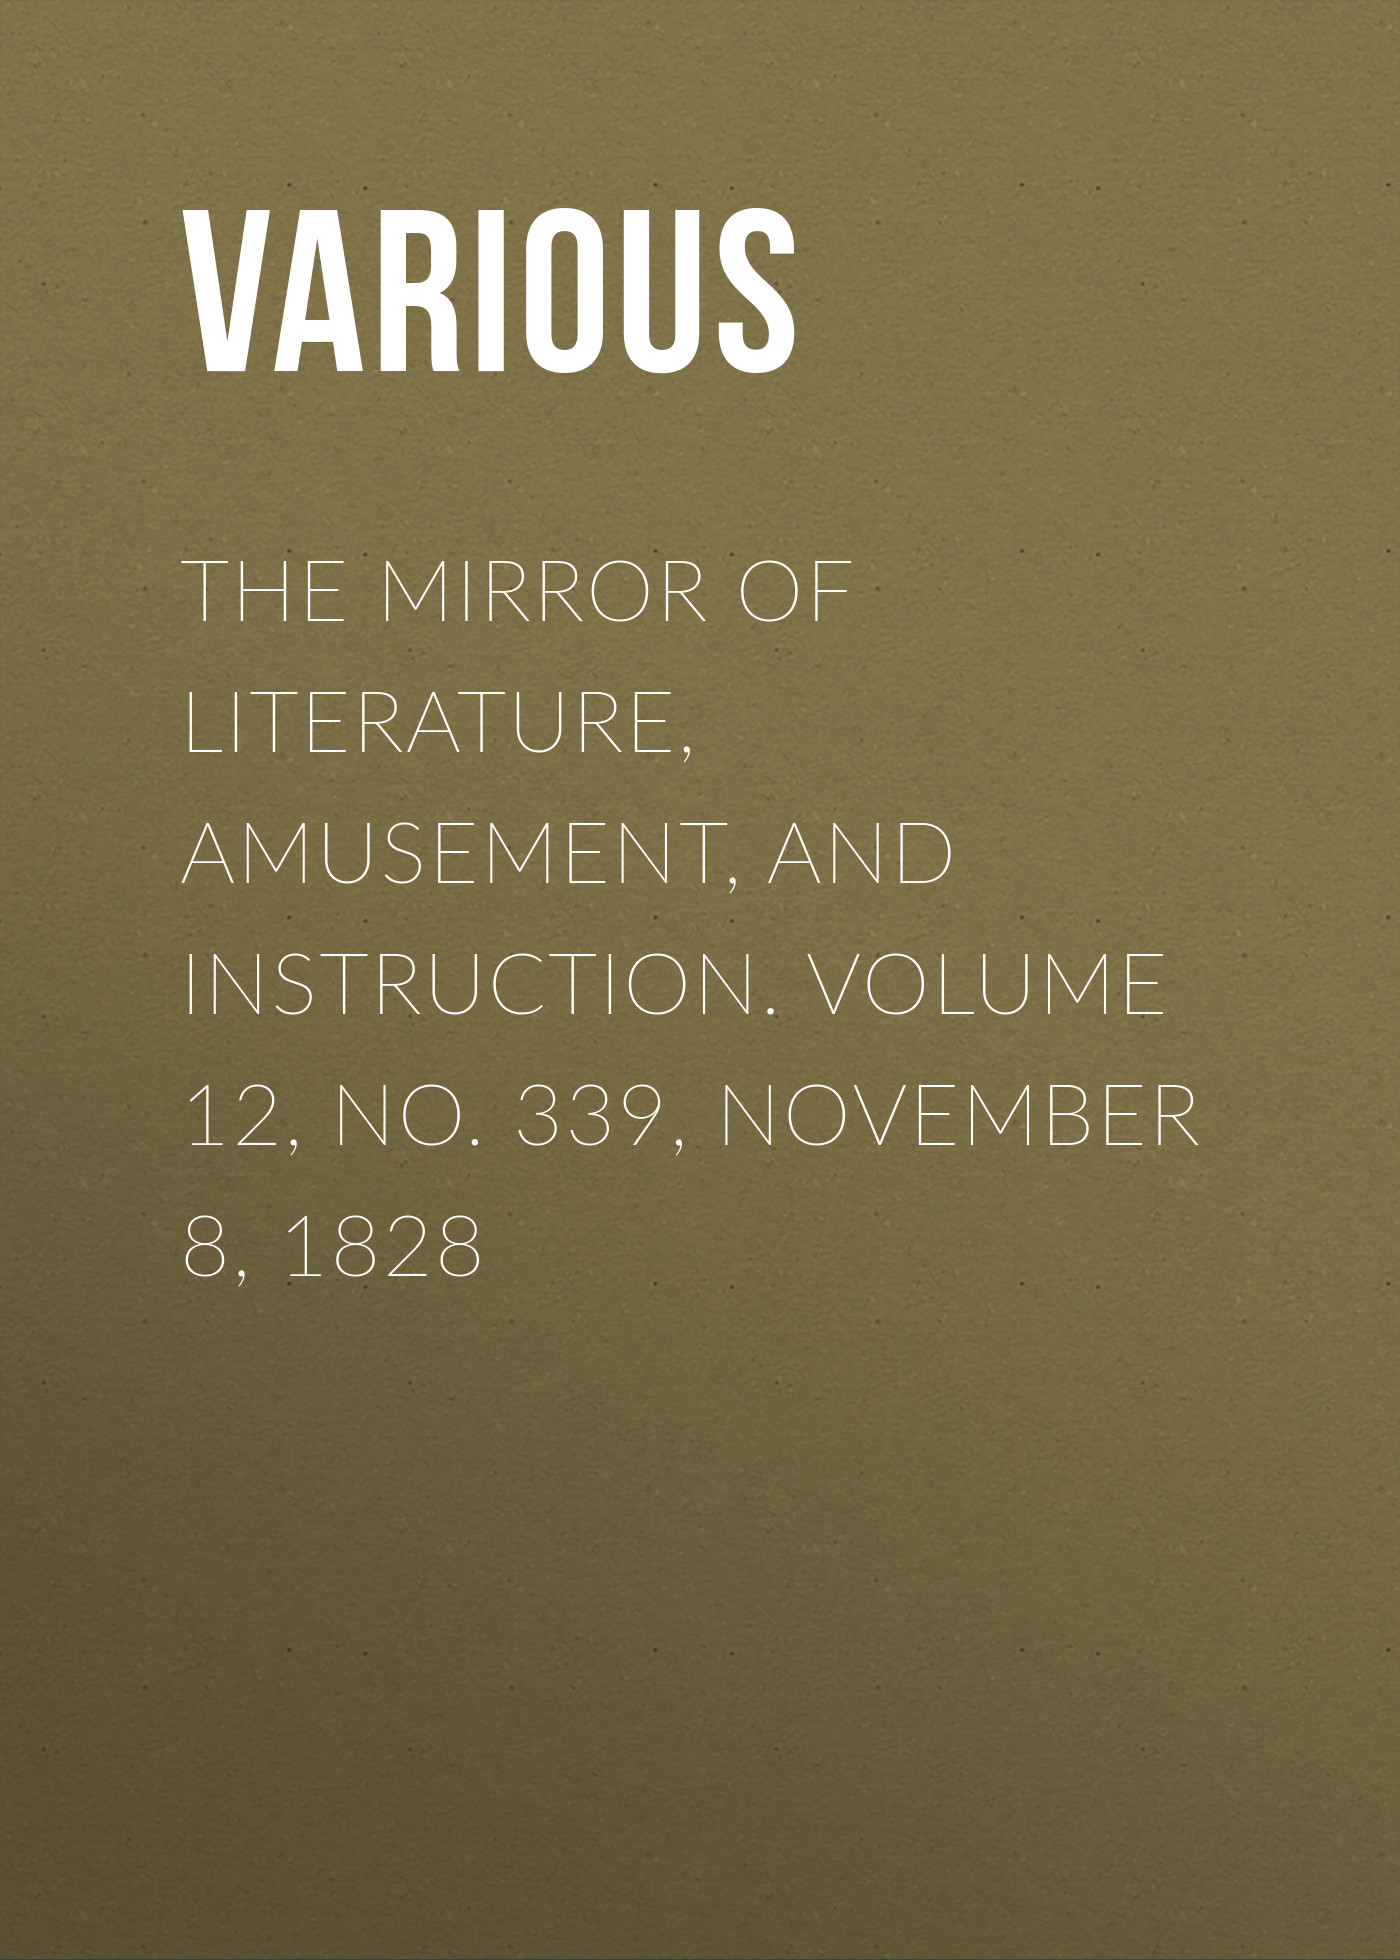 The Mirror of Literature, Amusement, and Instruction. Volume 12, No. 339, November 8, 1828